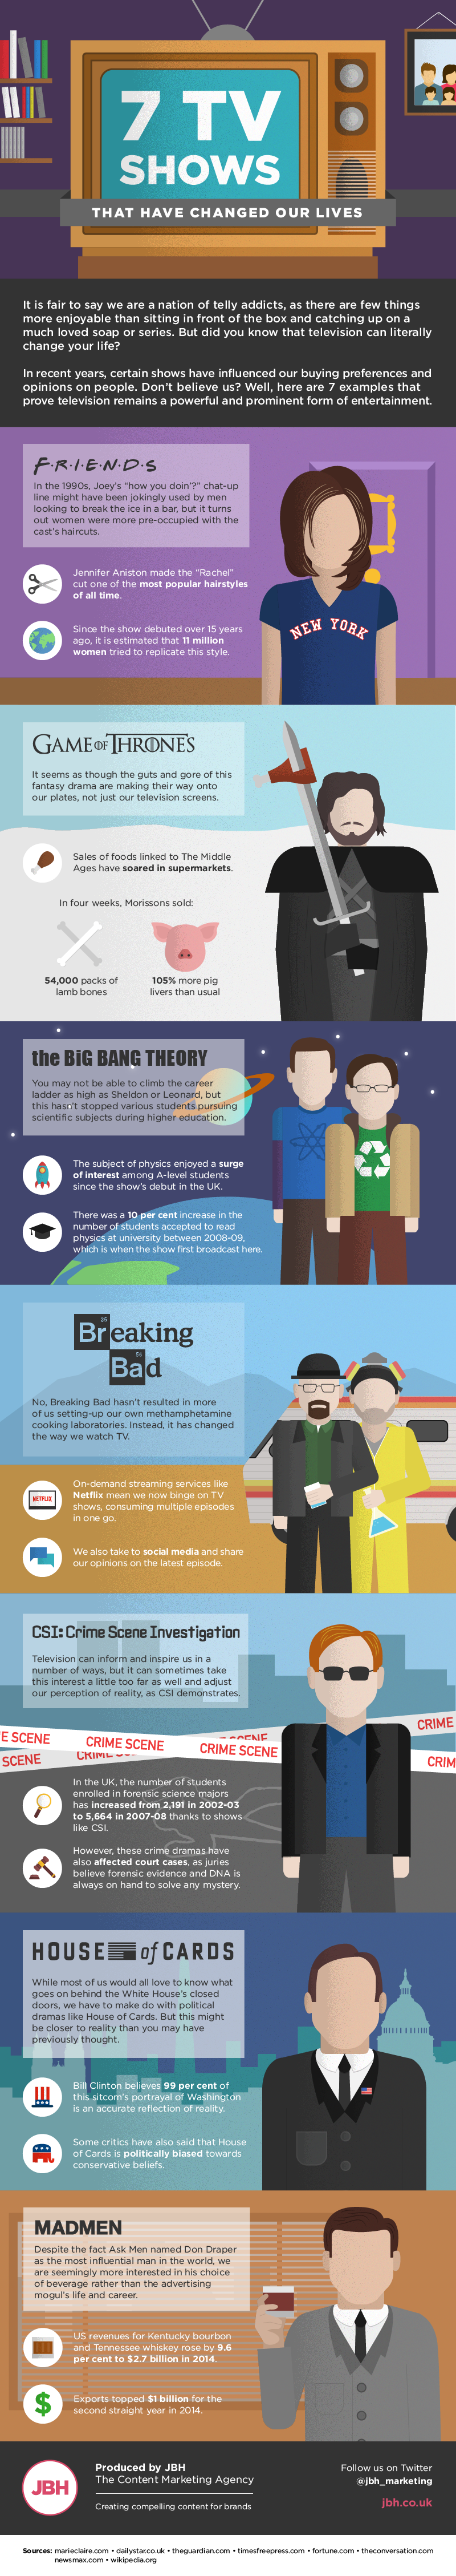 How TV Has Changed Us, and Why Apple Wants to Change TV [Infographic]